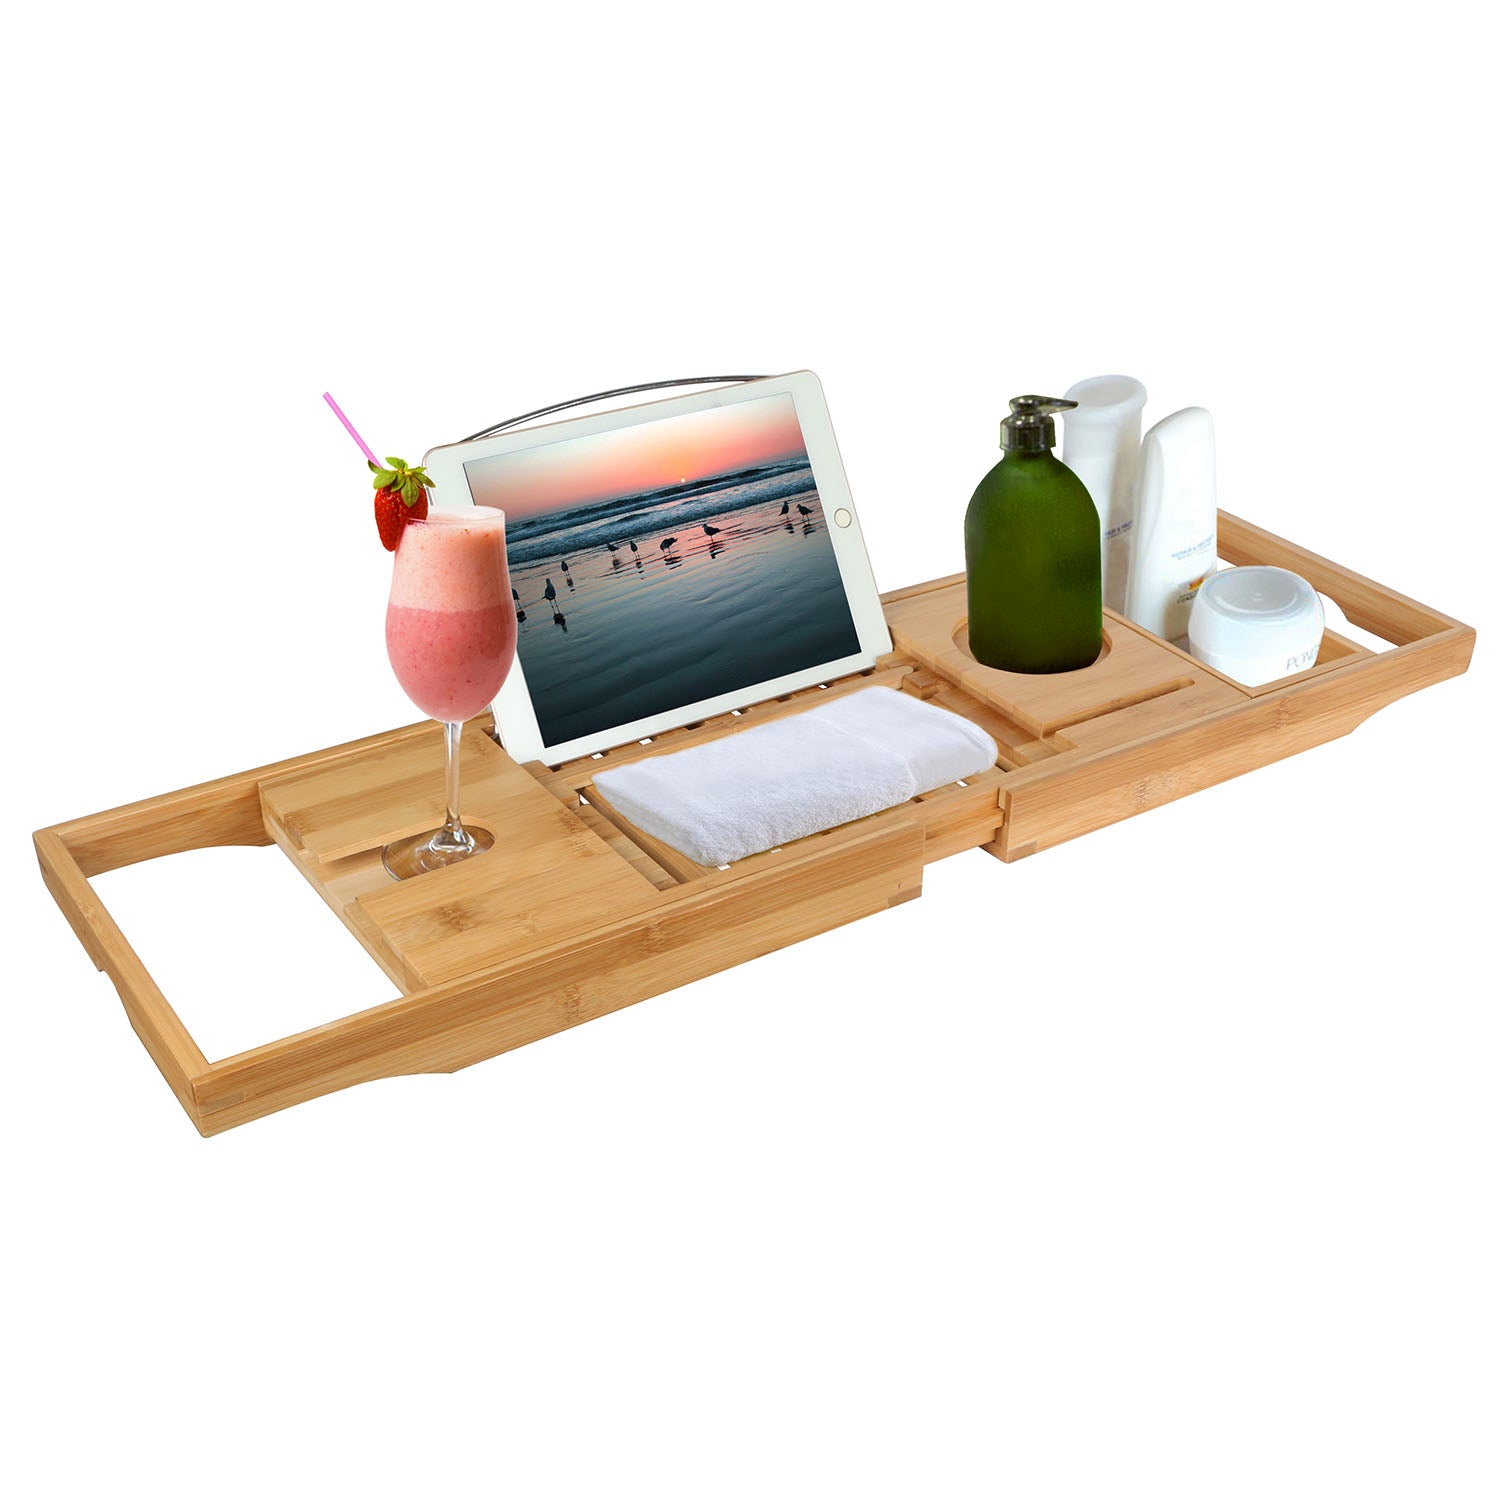 title:Bathtub Caddy Tray Crafted Bamboo Bath Tray Table Extendable Reading Rack Tablet Phone Holder Wine Glass Holder Shelf Desk Bathroom Spa;color:not applicable